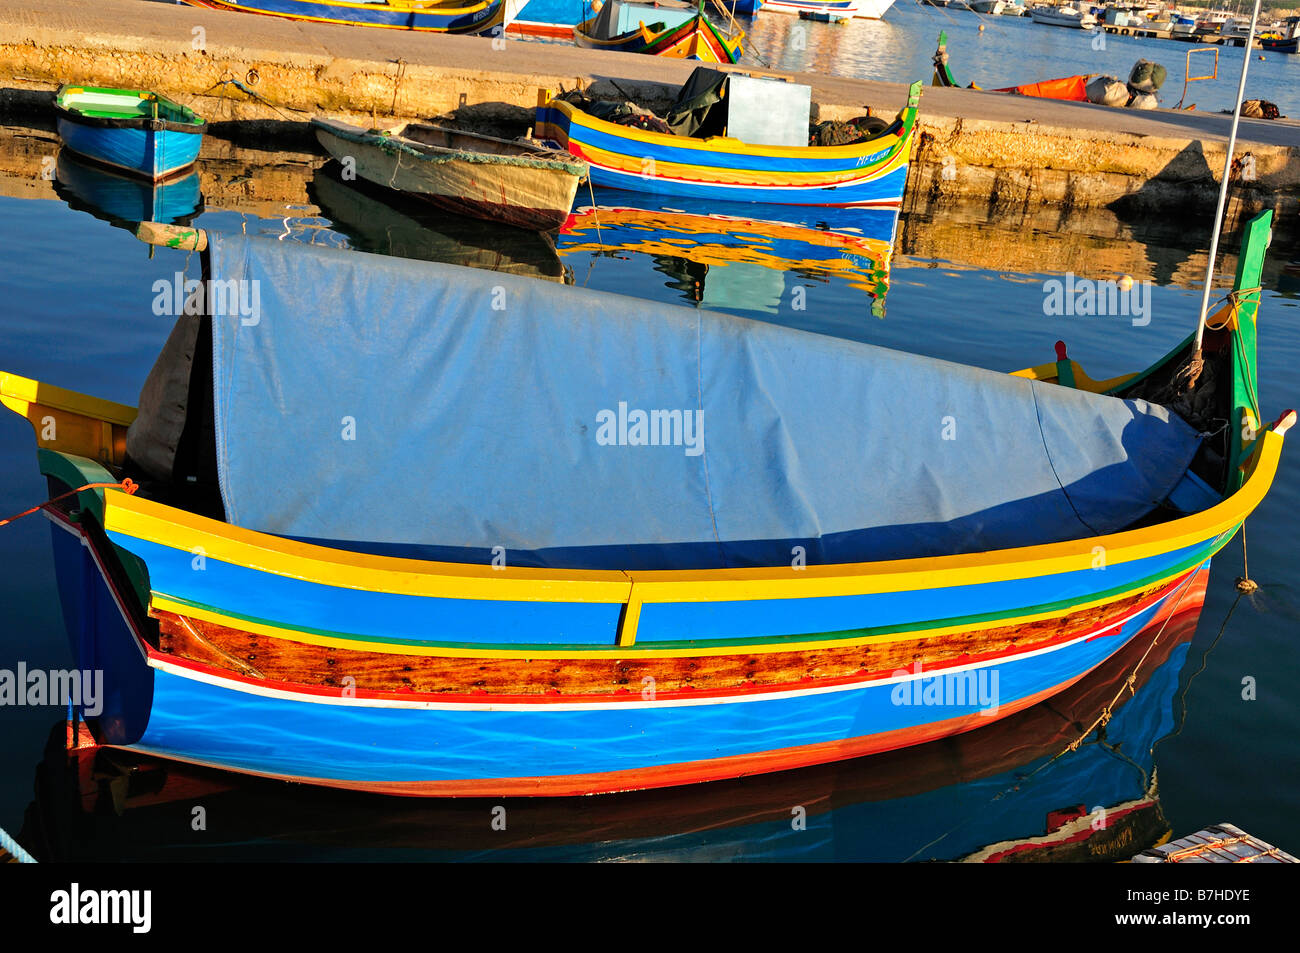 colorful boats Stock Photo